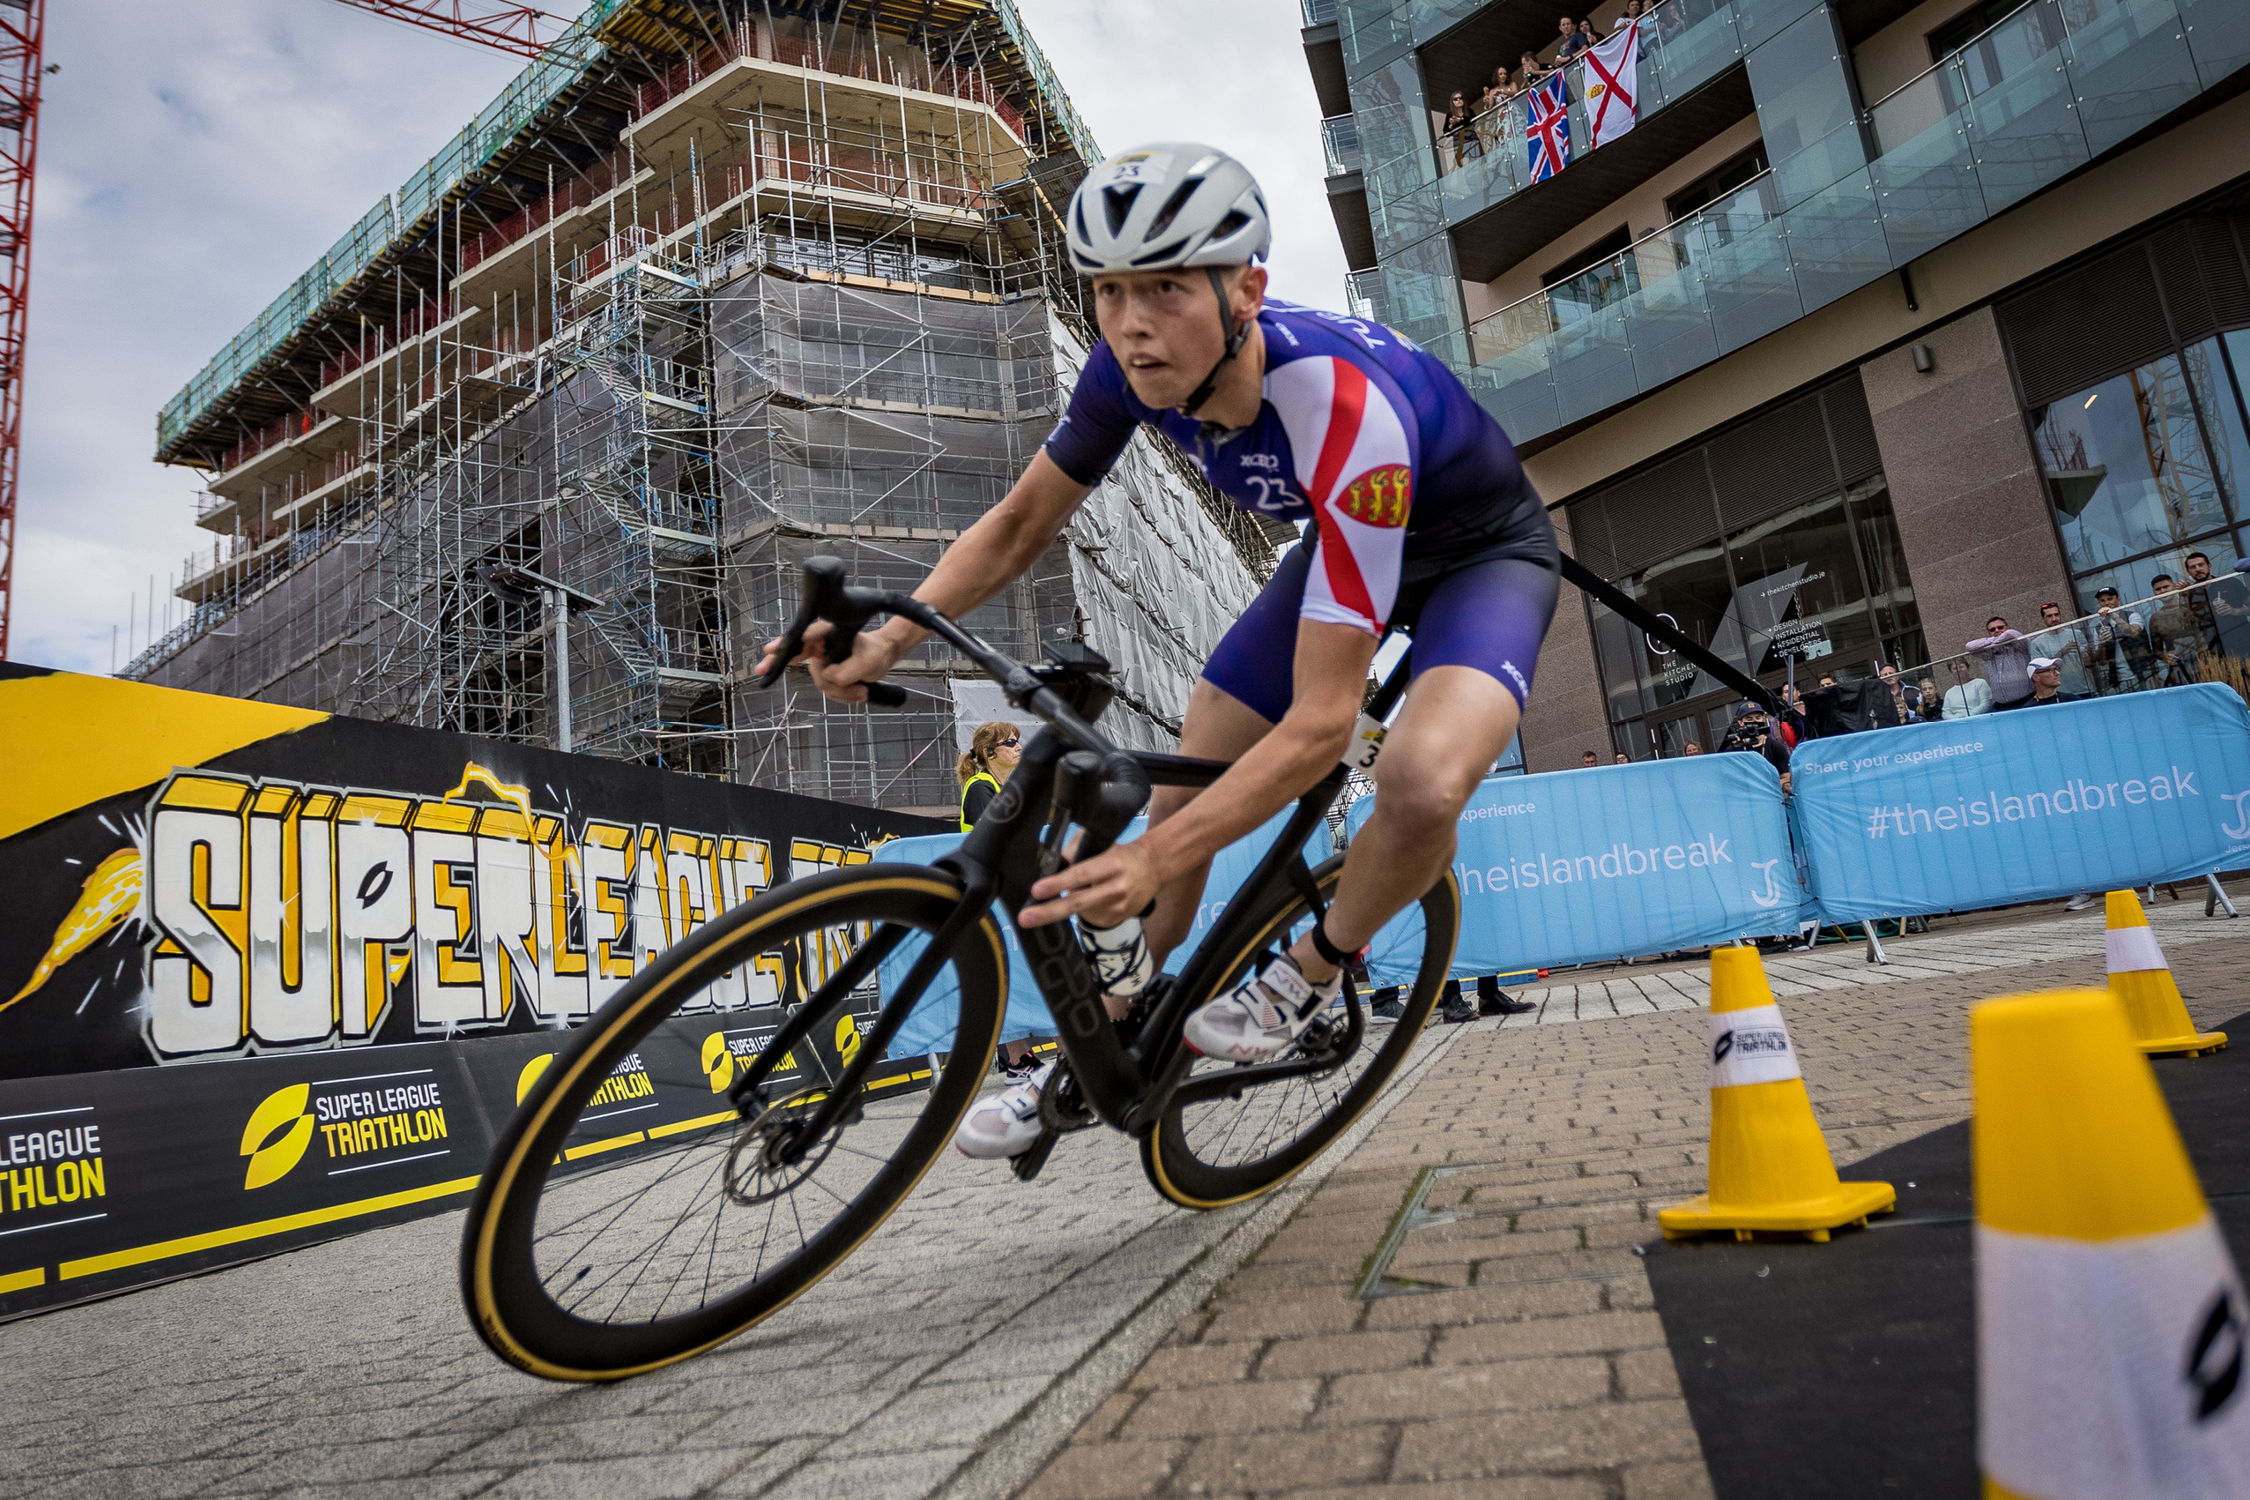 competitive cyclist racing through city street course